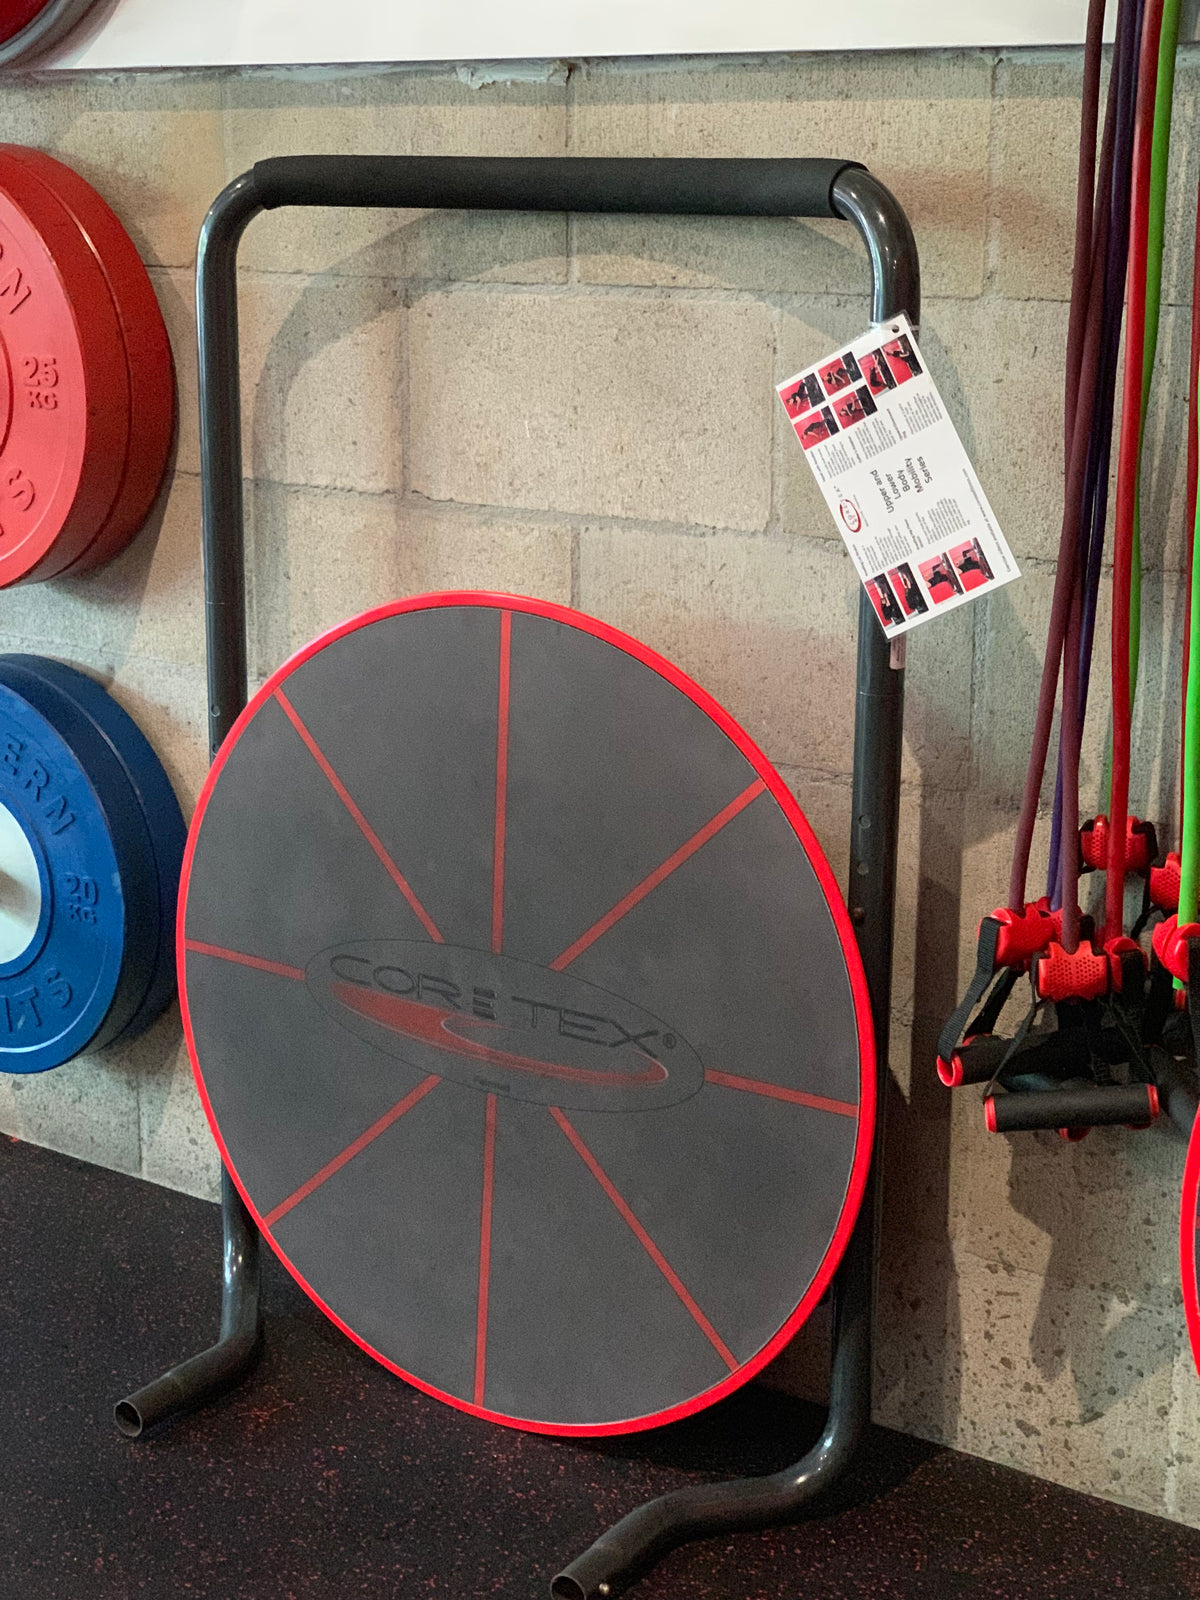 Red Core-Tex Reactive Trainer stored discreetly against wall next to weights and jump ropes 